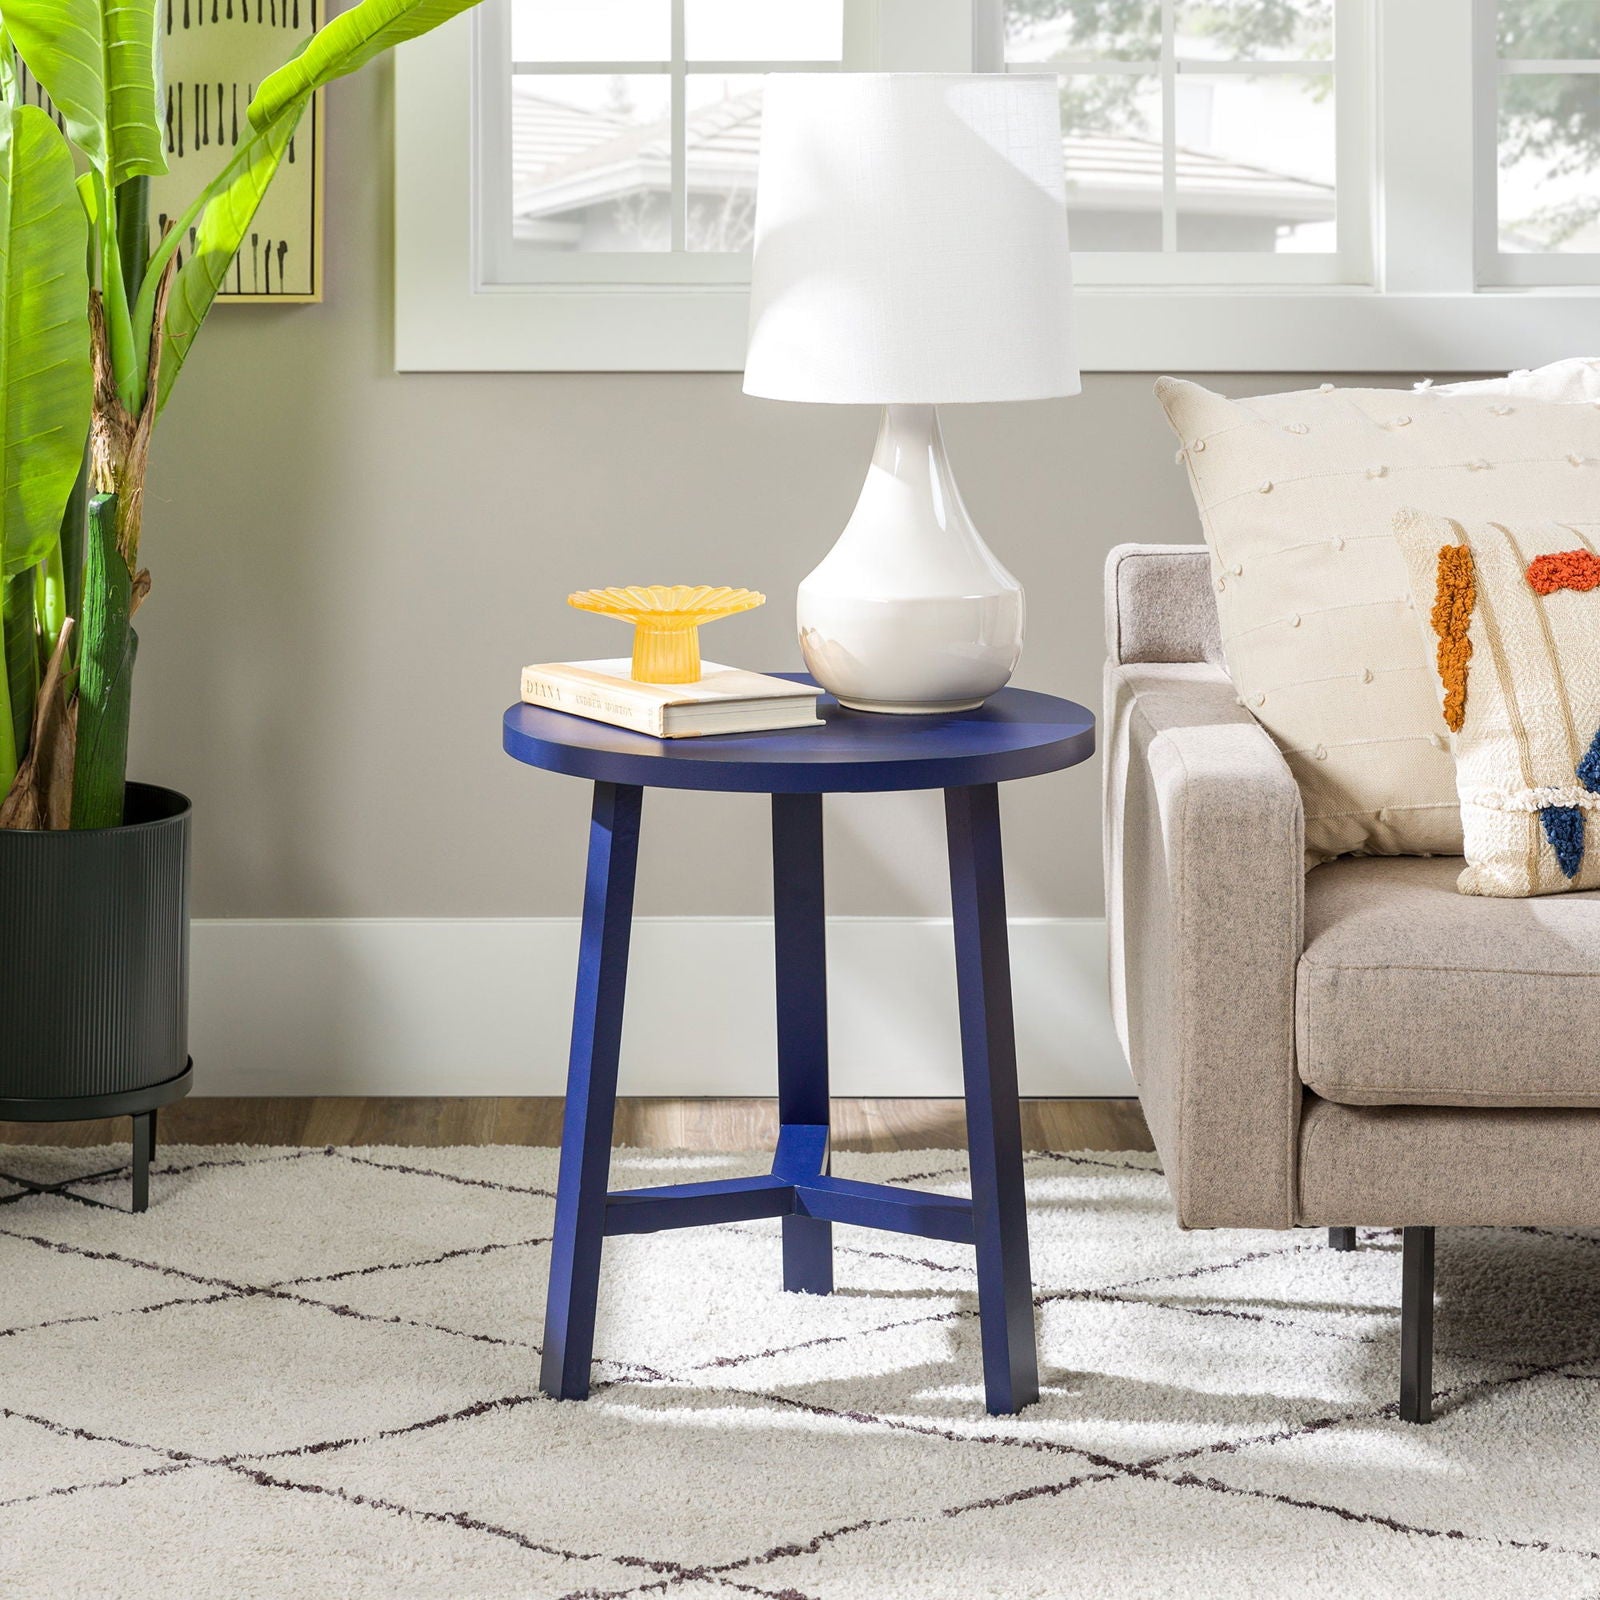 Emerson Simple 3-Leg Round Side Table - Mac & Mabel